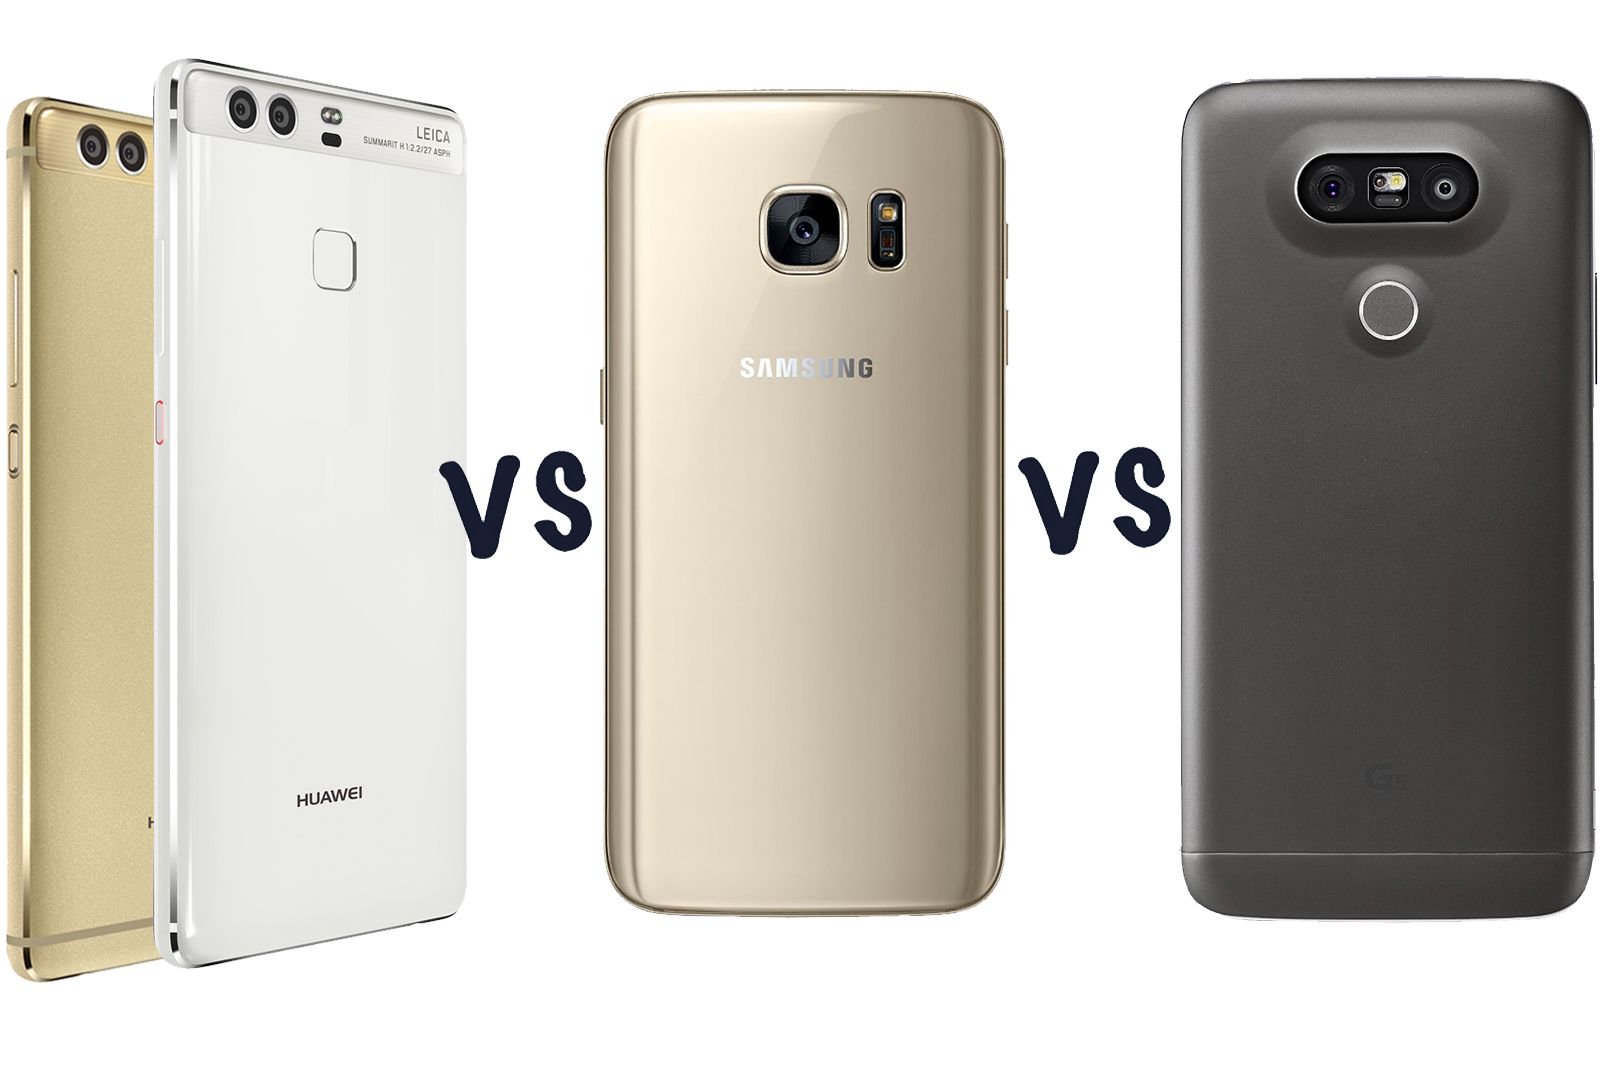 huawei p9 vs p9 plus vs samsung galaxy s7 vs lg g5 what s the difference  image 1